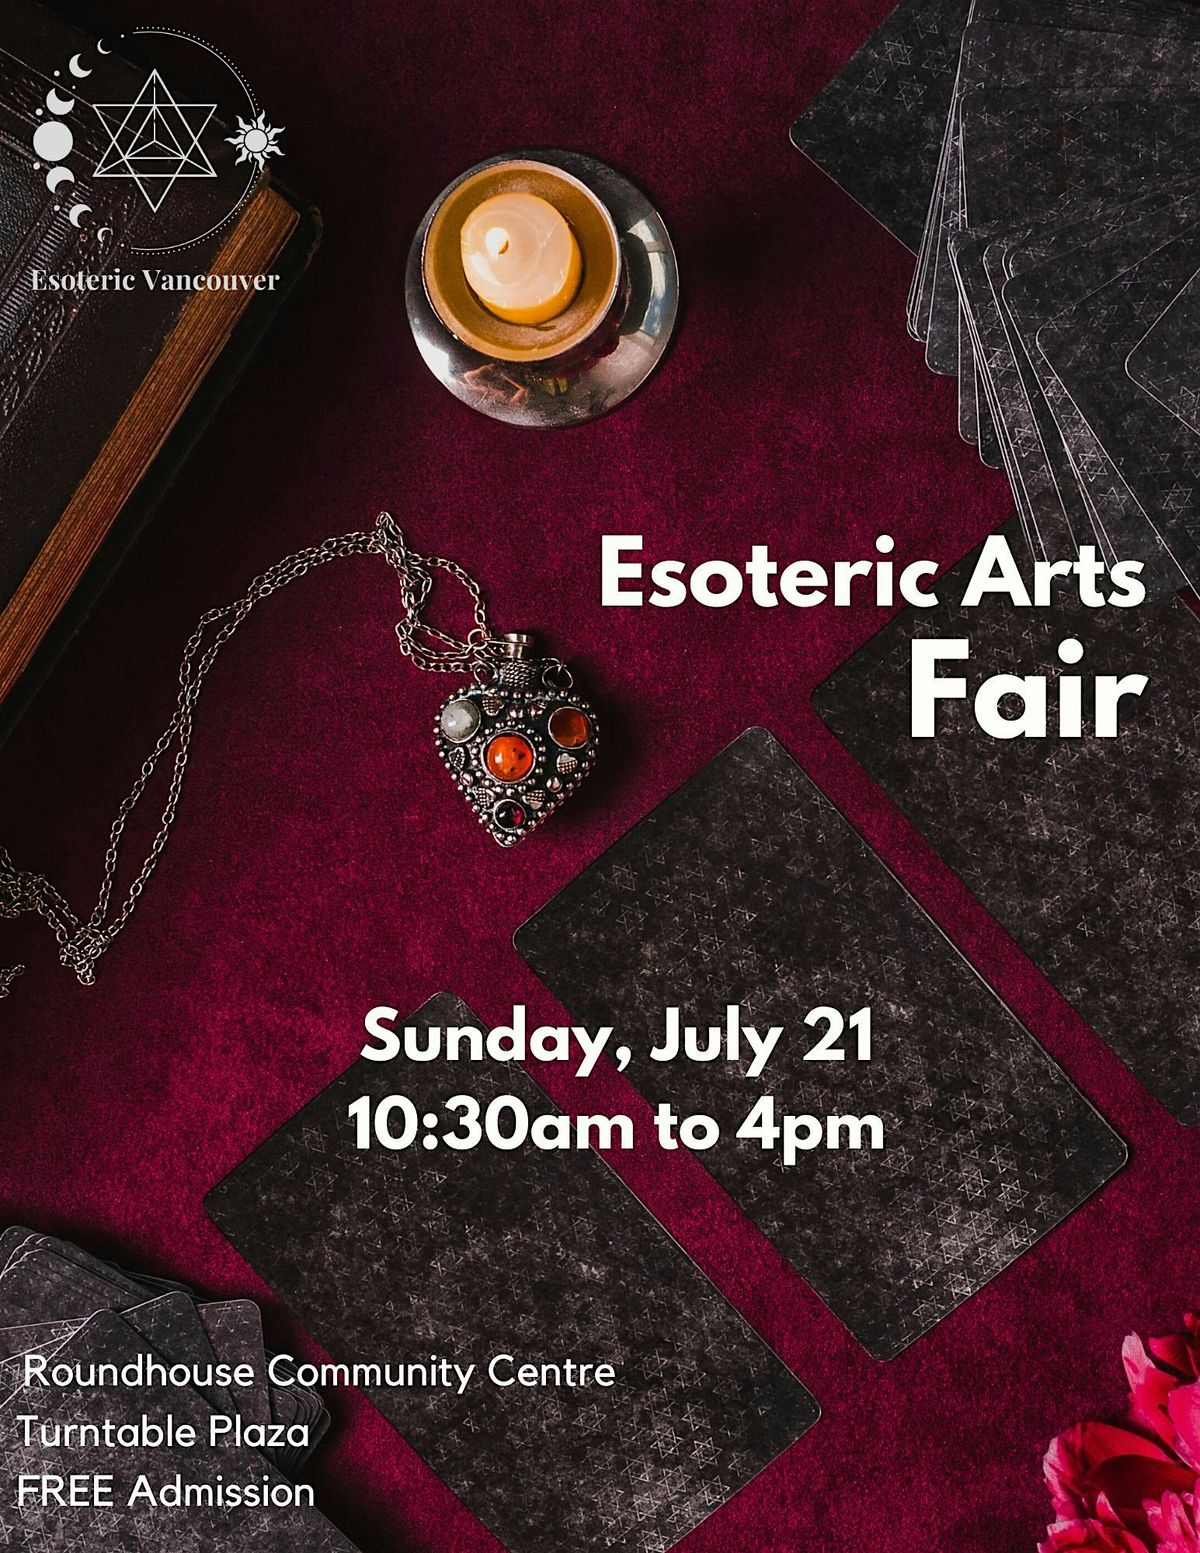 Esoteric Arts Fair by Esoteric Vancouver